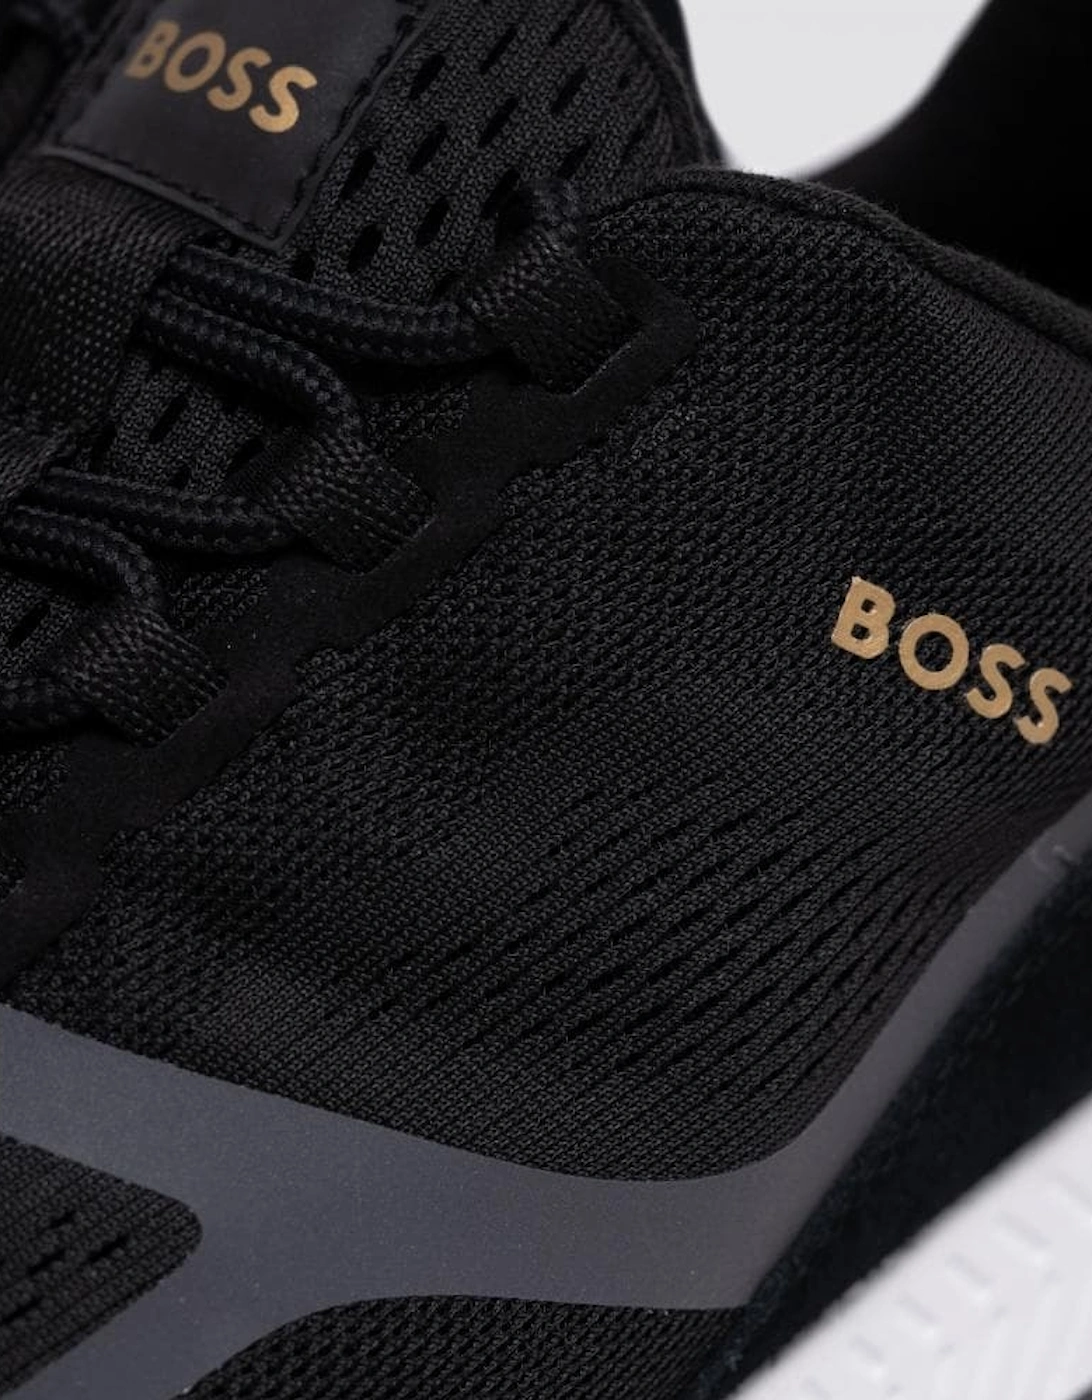 BOSS Green Titanium_Runn Mens Mesh Lace-Up Trainers With Suede Trims